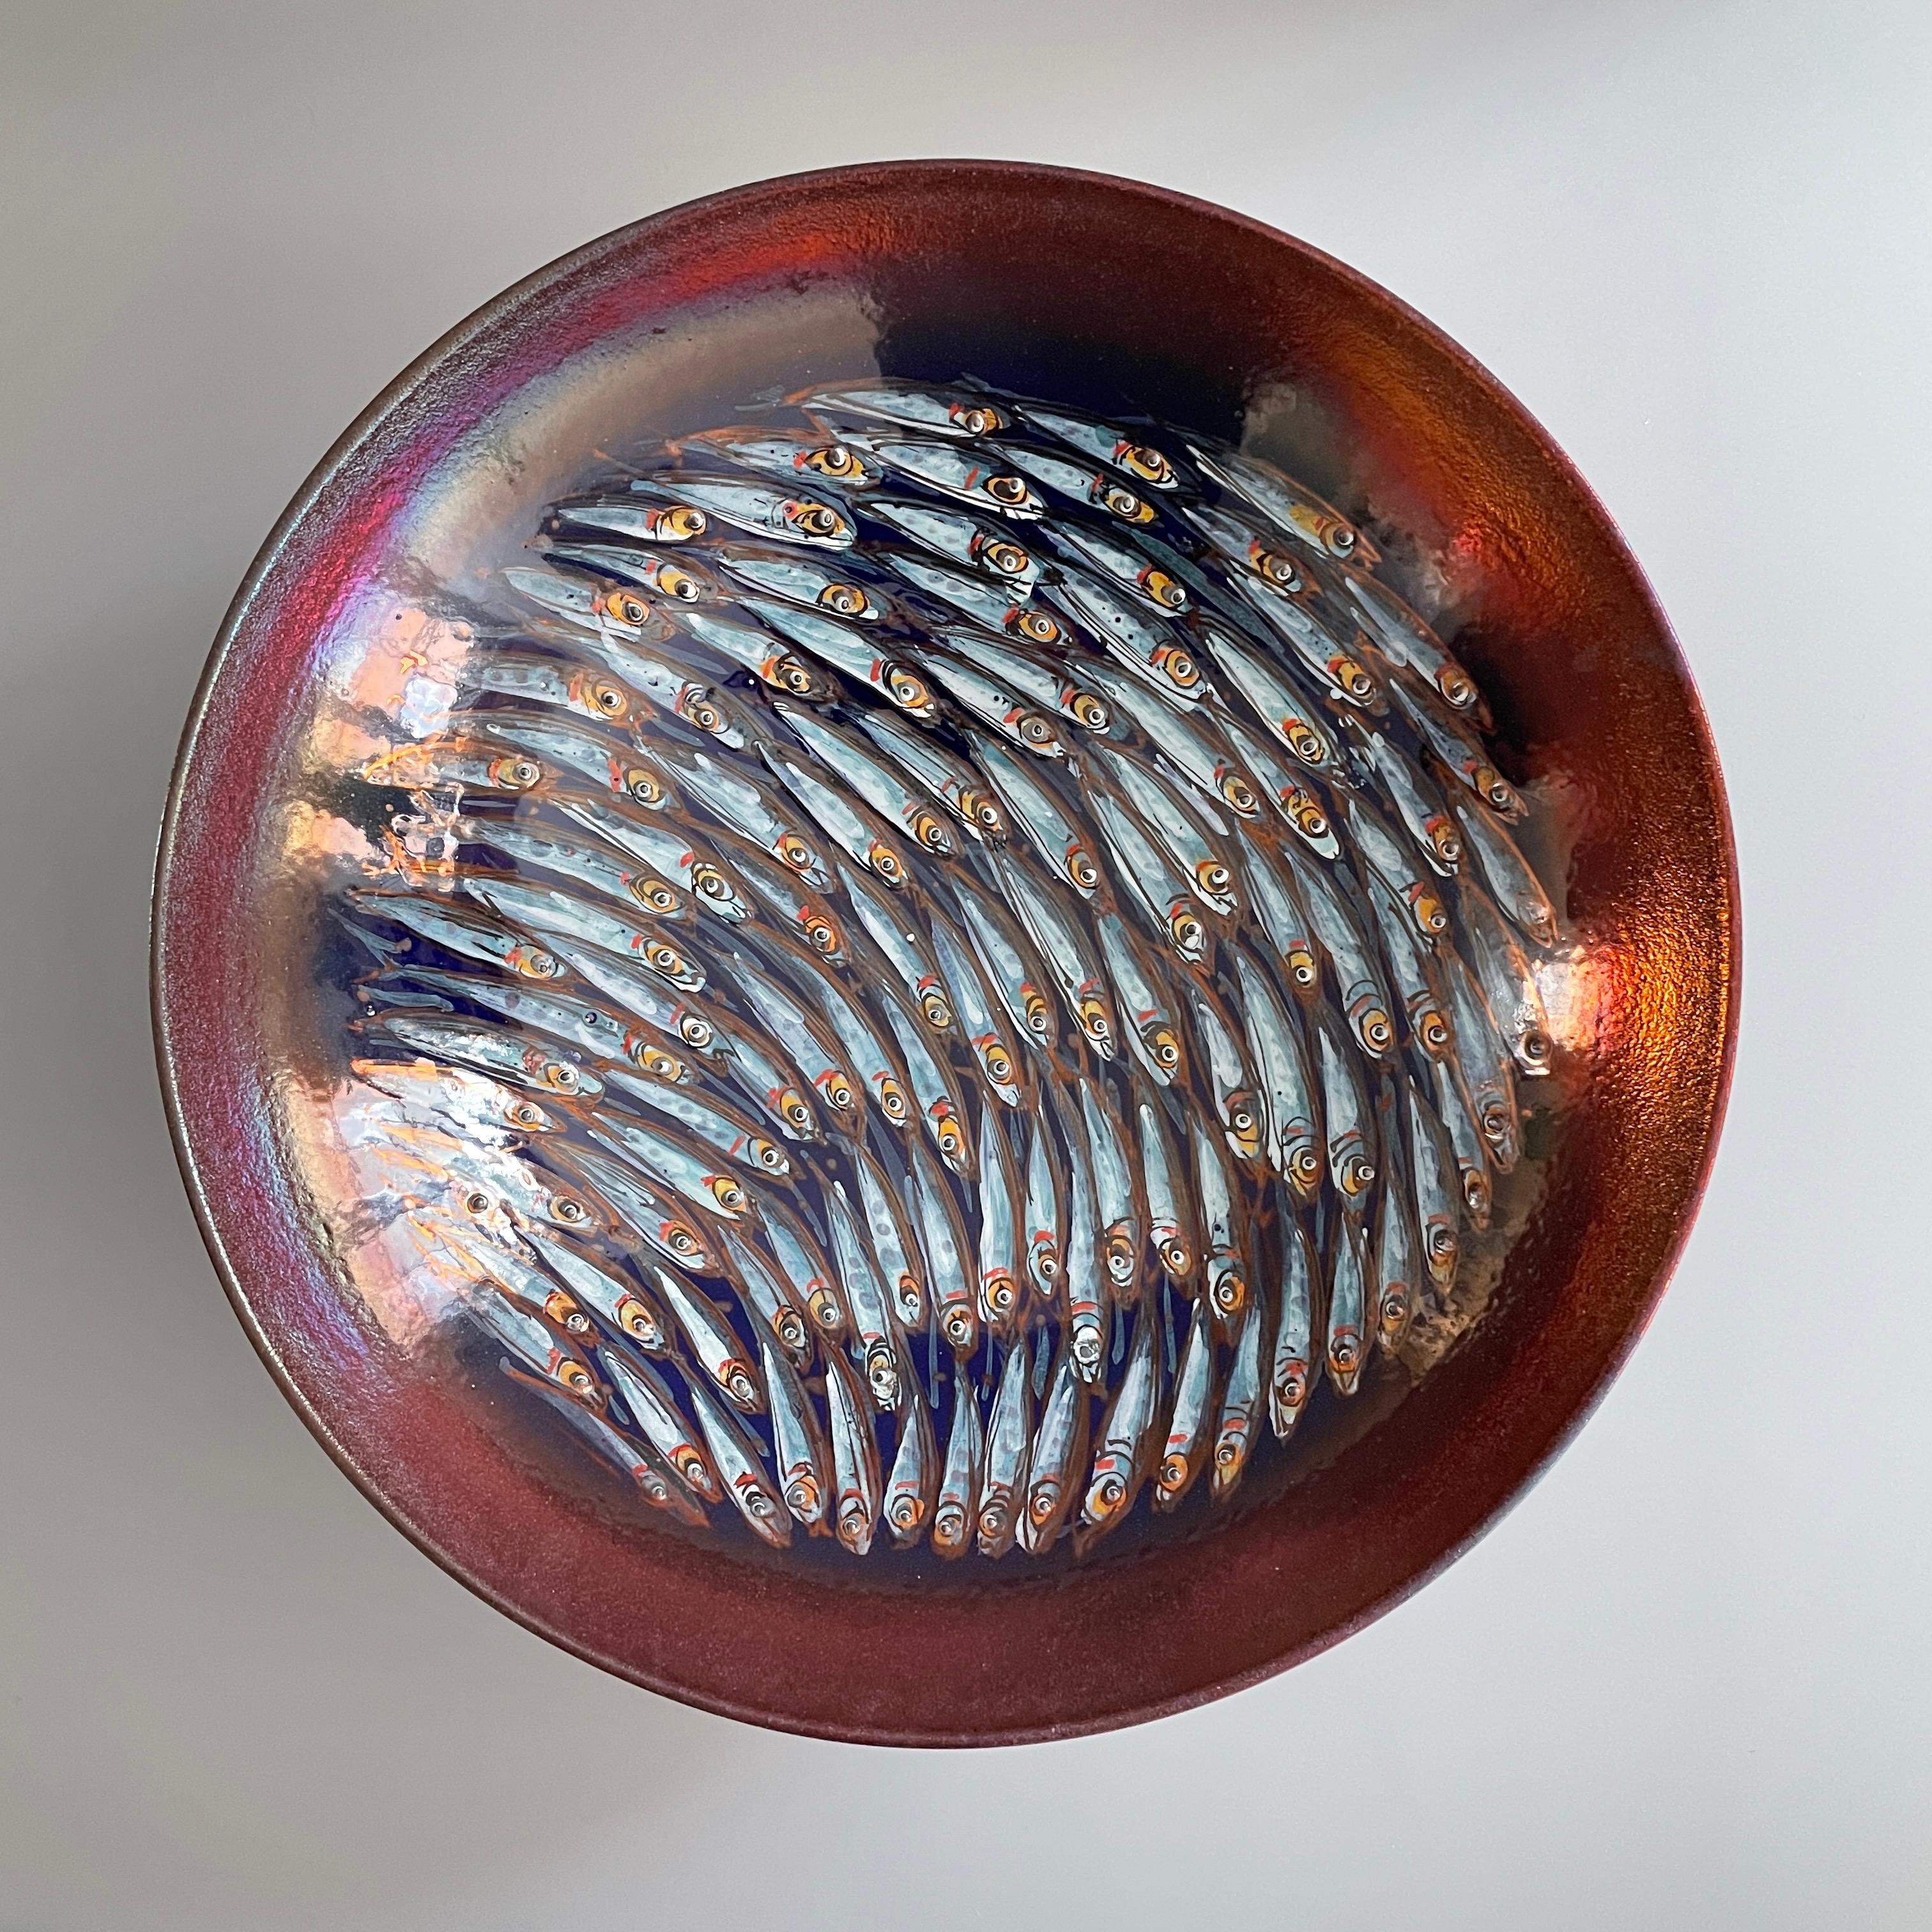 Mediterranea large bowl, 2020, full-fire reduction faience earthenware with copper lustre 30 cm diameter 10cm height, hand painted unique piece.

Bottega Vignoli is a brand of artistic ceramics based in Faenza, one of the most representative